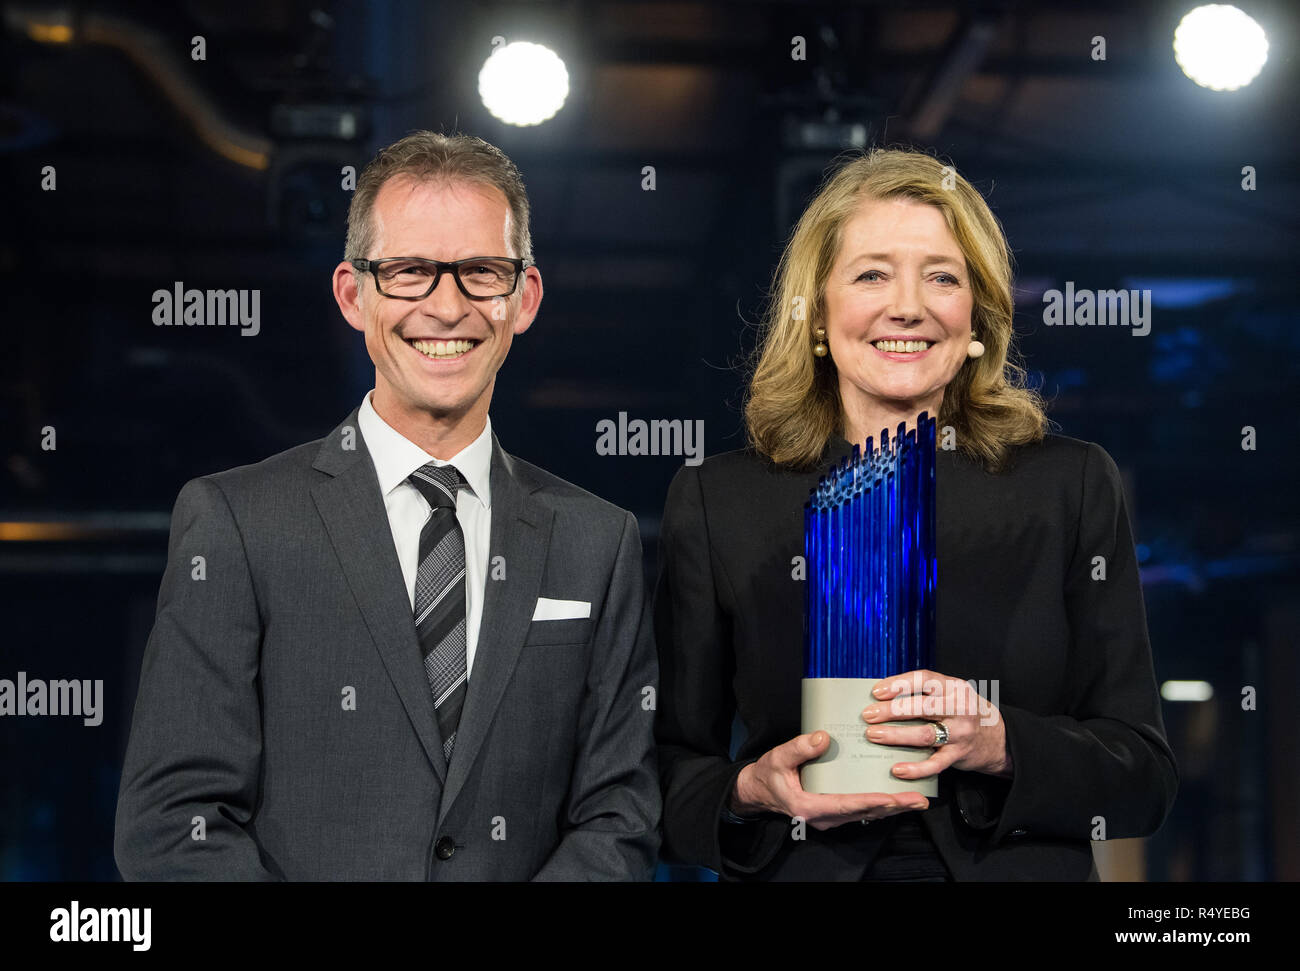 28 November 2018, Berlin: The prizewinners Helga Rübsamen-Schaeff (r) and Holger Zimmermann will be on stage after the award ceremony. The medicine of the company AiCuris Anti-infective Cures (Wuppertal), founded by chemist Rübsamen-Schaeff and today managed by Zimmermann, is intended to protect people from a dangerous virus after bone marrow transplants. Every year, the Federal President awards the German Future Prize to individuals or groups for outstanding technical, engineering or scientific innovation. The award is endowed with 250,000 euros. Photo: Bernd von Jutrczenka/dpa Stock Photo